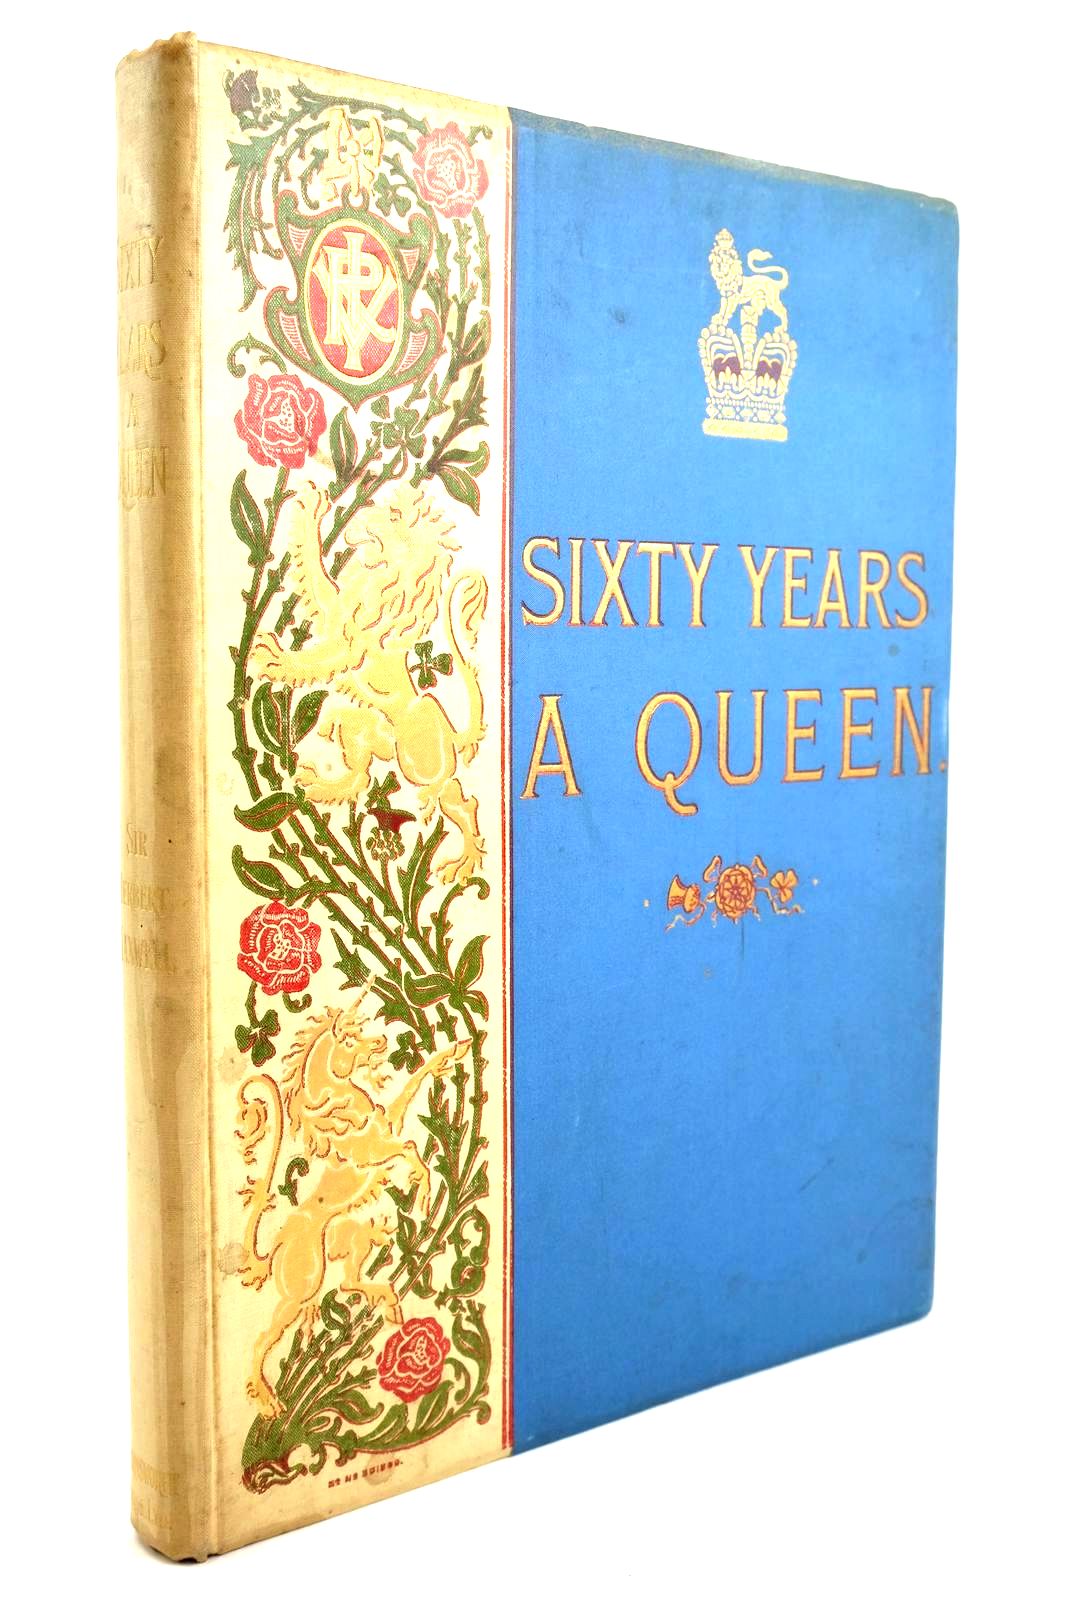 Photo of SIXTY YEARS A QUEEN written by Maxwell, Herbert published by Harmsworth Bros., Limited (STOCK CODE: 1320208)  for sale by Stella & Rose's Books